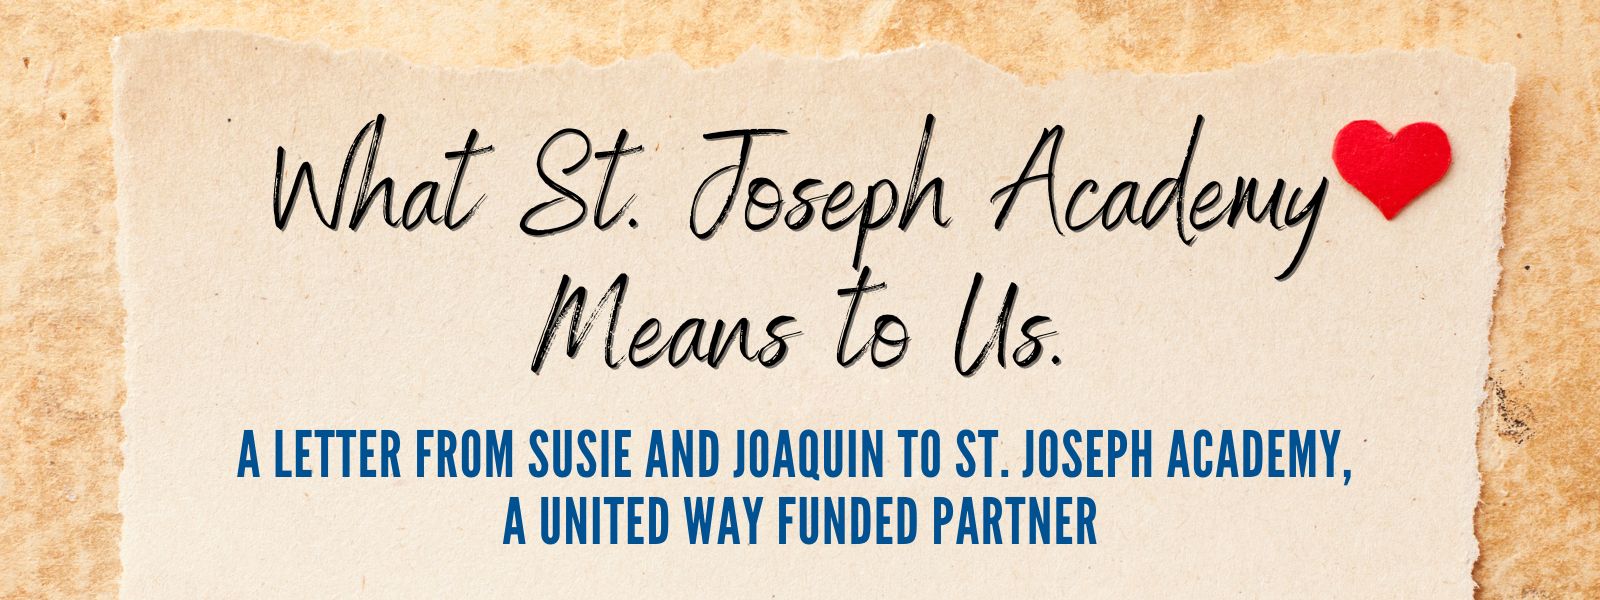 Letter to St. Joseph Academy